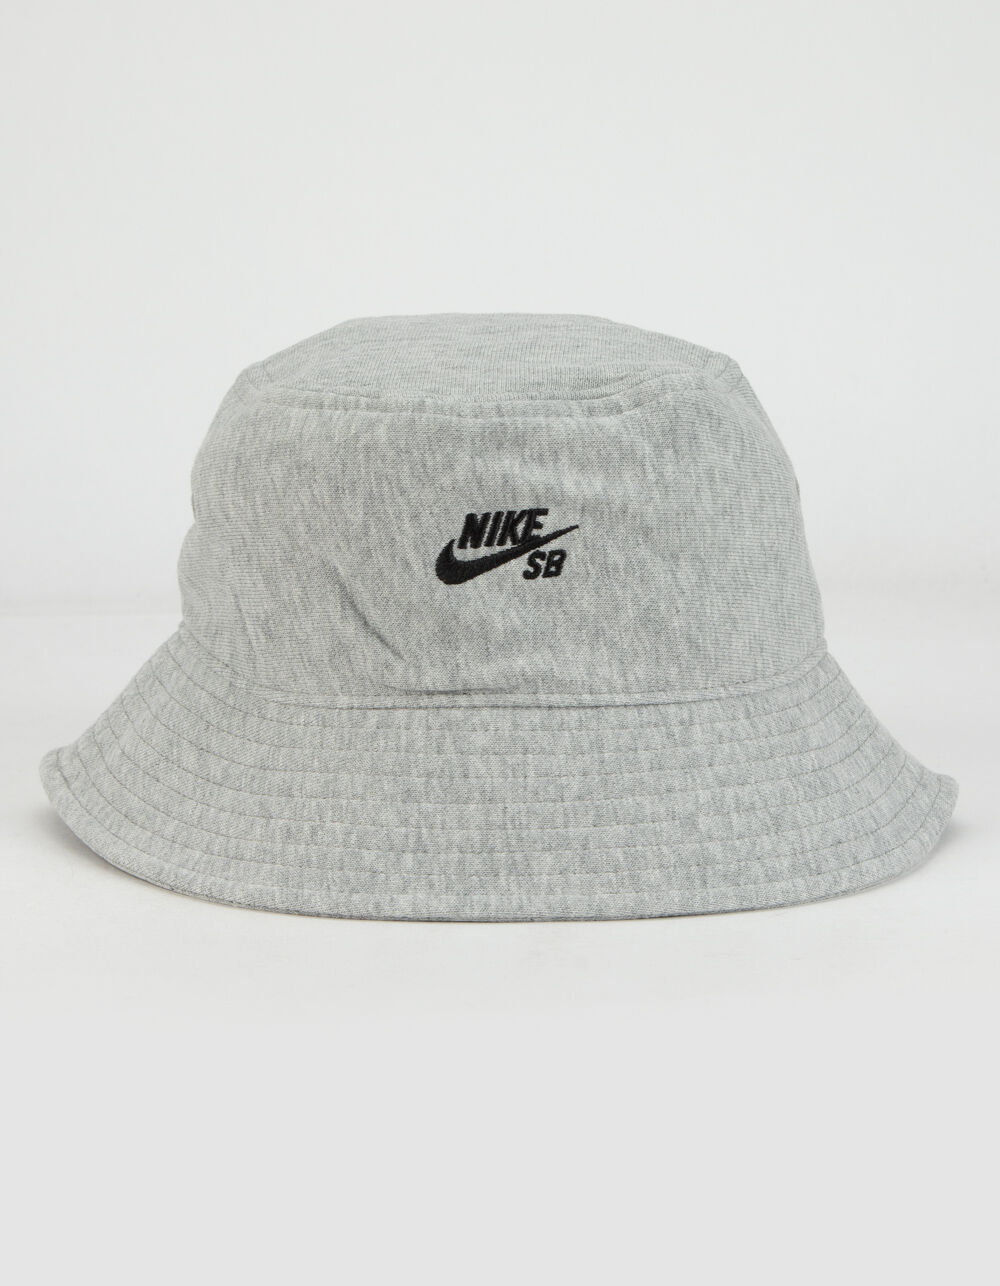 NIKE SB French Terry Mens Gray Bucket Hat - GRAY | Tillys